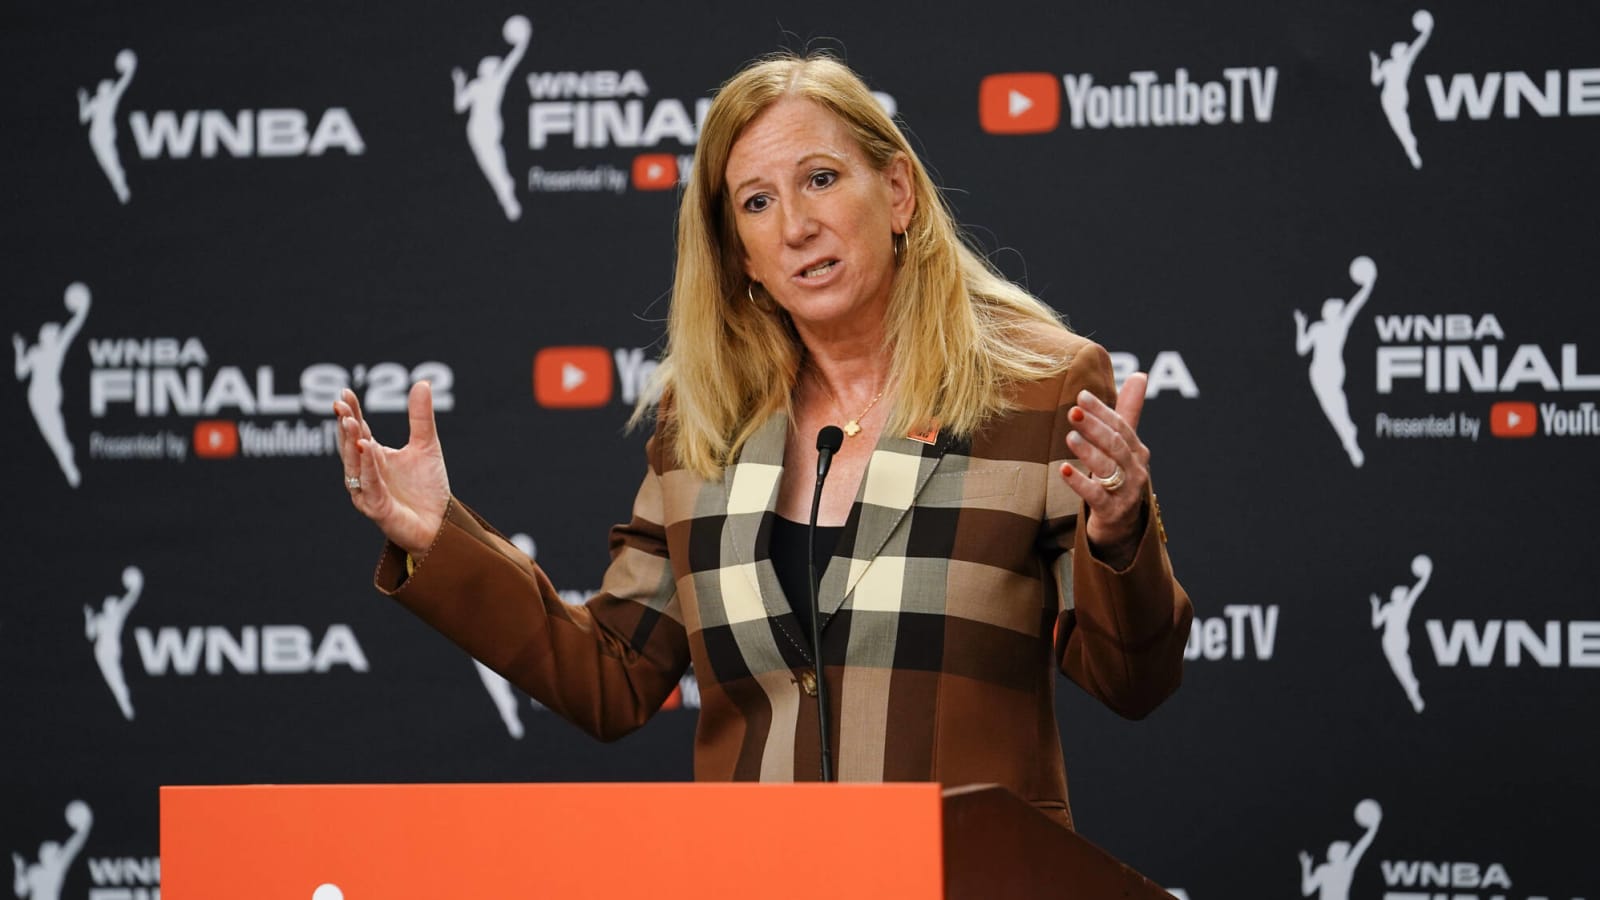 WNBA Draft a major moment in league's growth trajectory